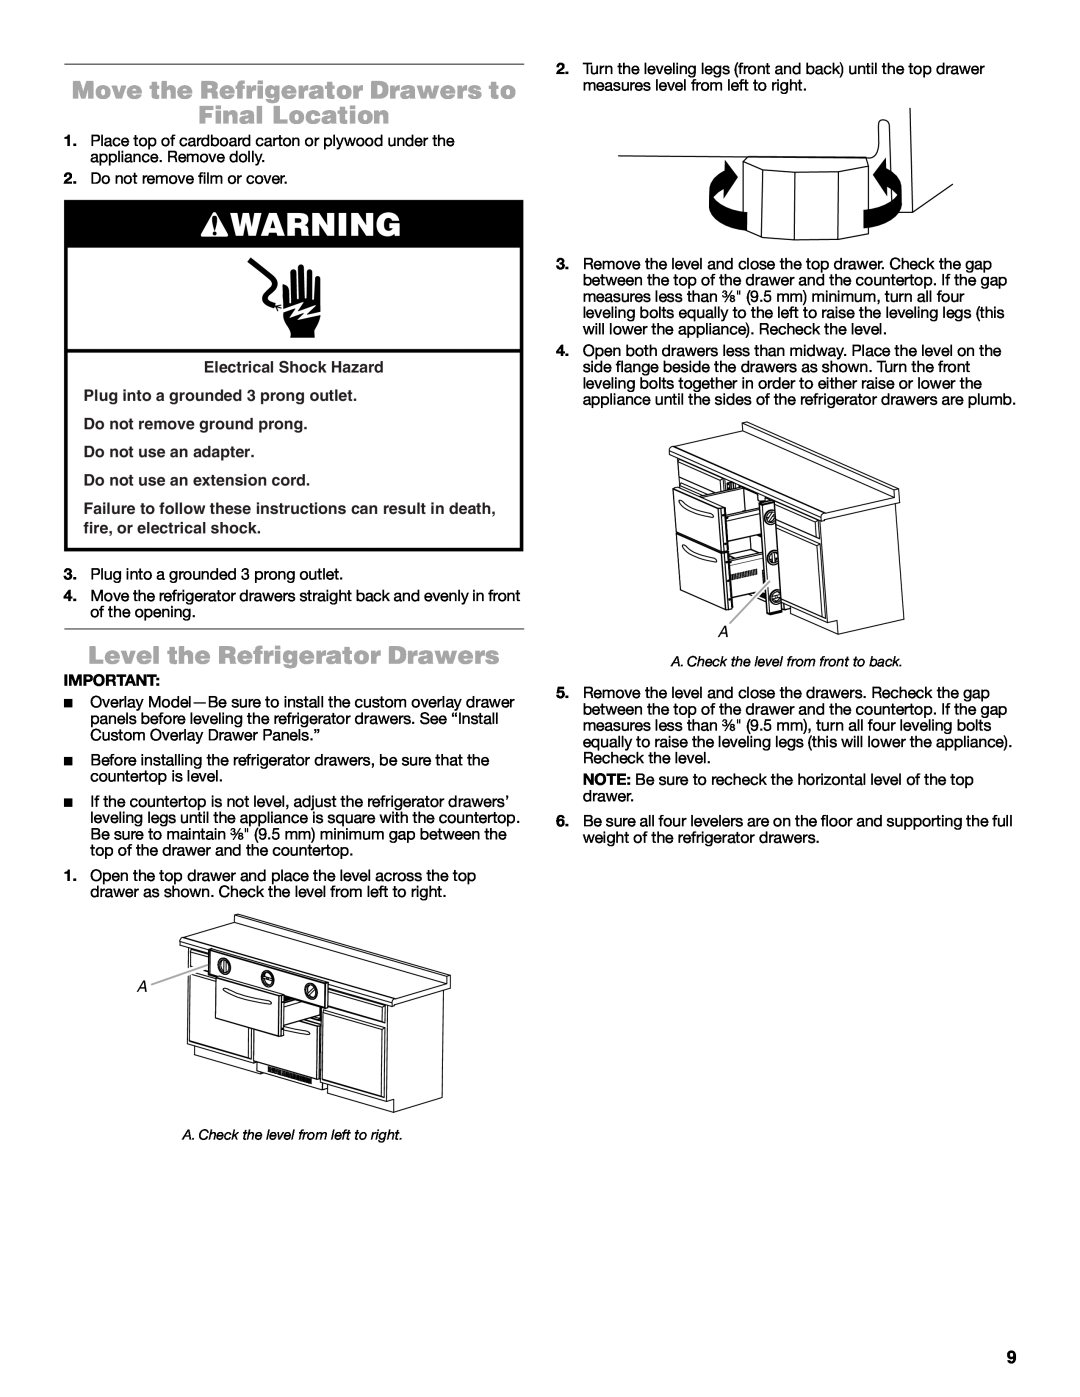 Jenn-Air W10549548A manual Move the Refrigerator Drawers to Final Location, Level the Refrigerator Drawers 